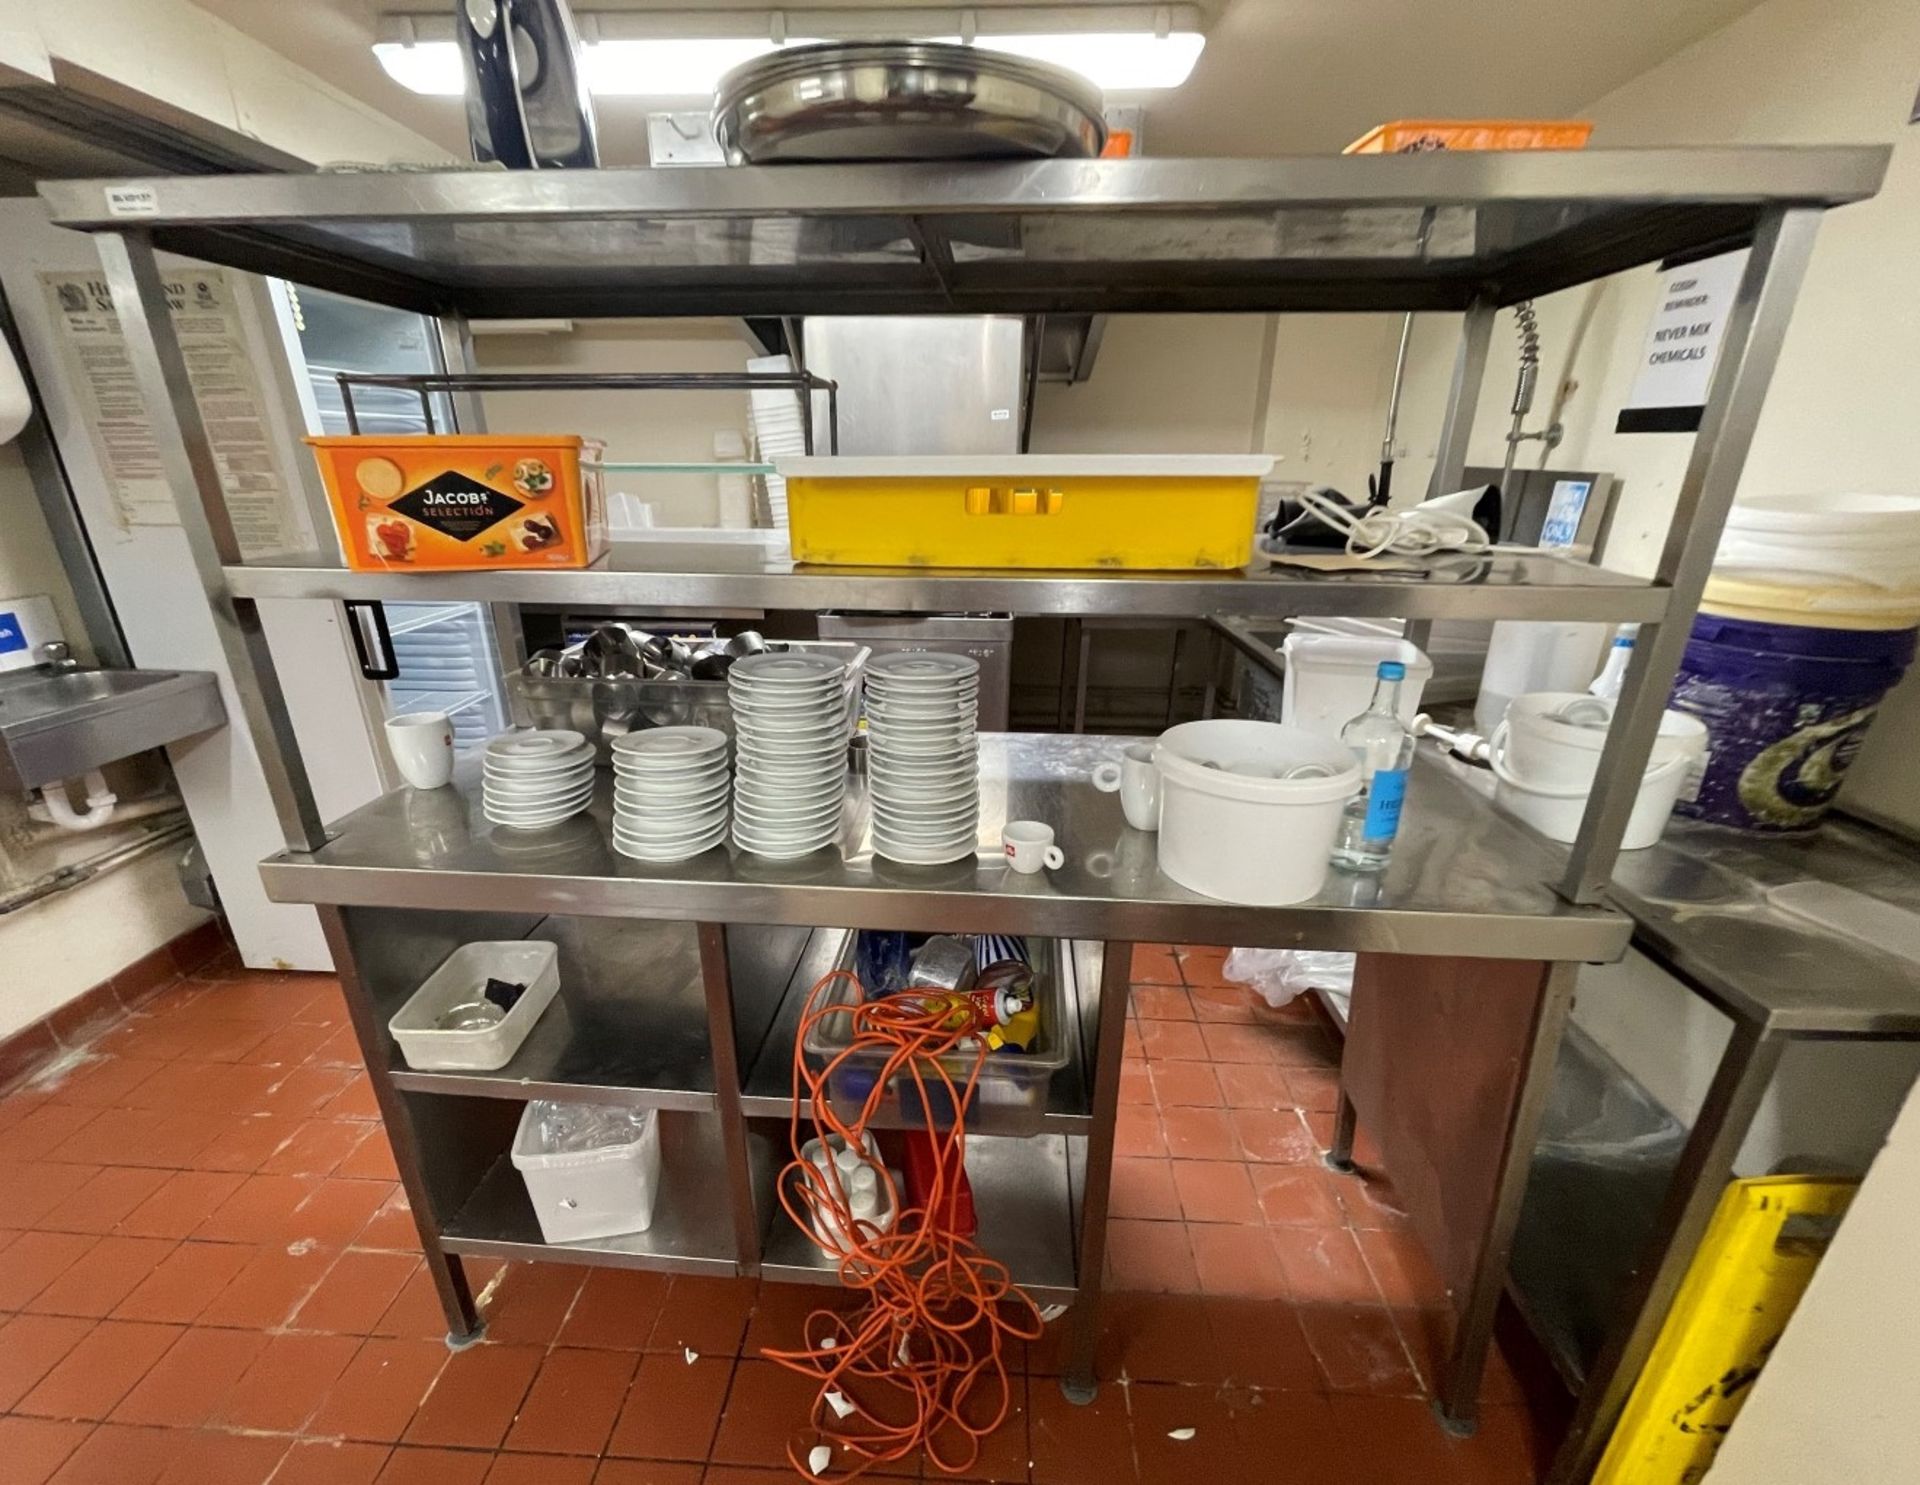 1 x Stainless Steel Passthrough Prep Bench For Commercial Kitchens - Dimensions: H160 x W160 x D60 - Image 3 of 3